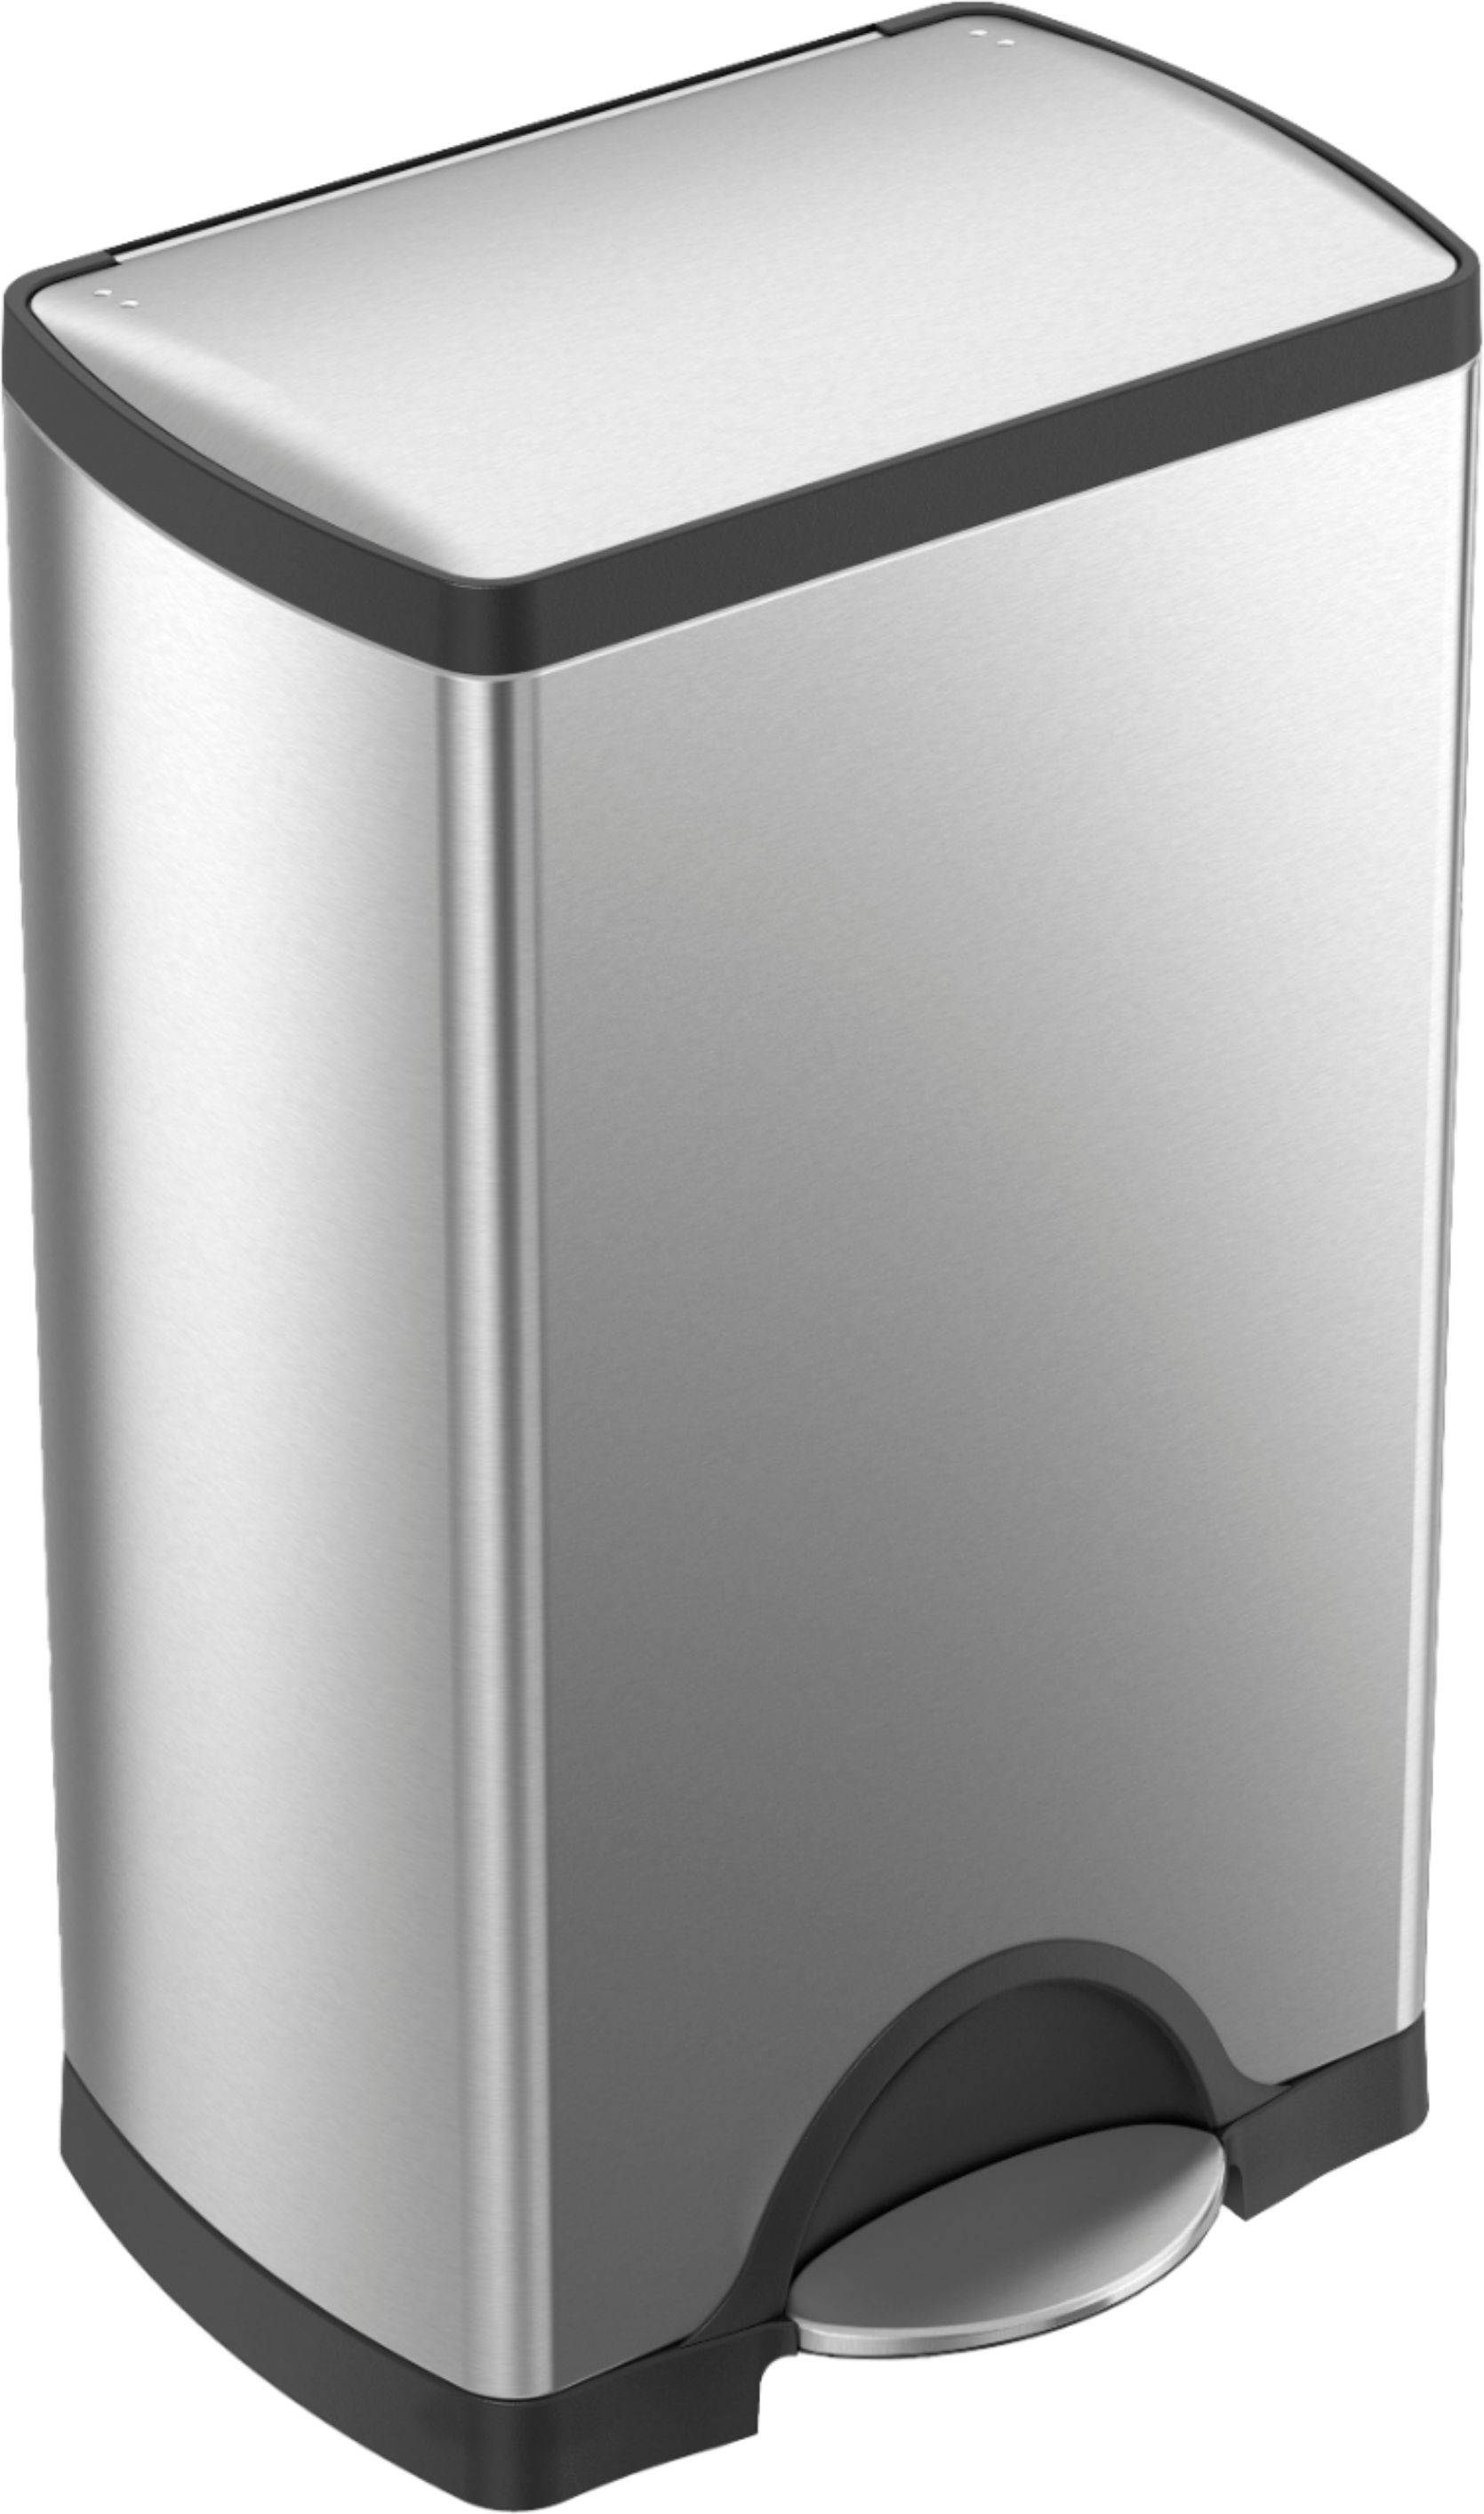 Angle View: simplehuman 38 Liter Rectangular Step Can, Brushed Stainless Steel - Brushed Stainless Steel